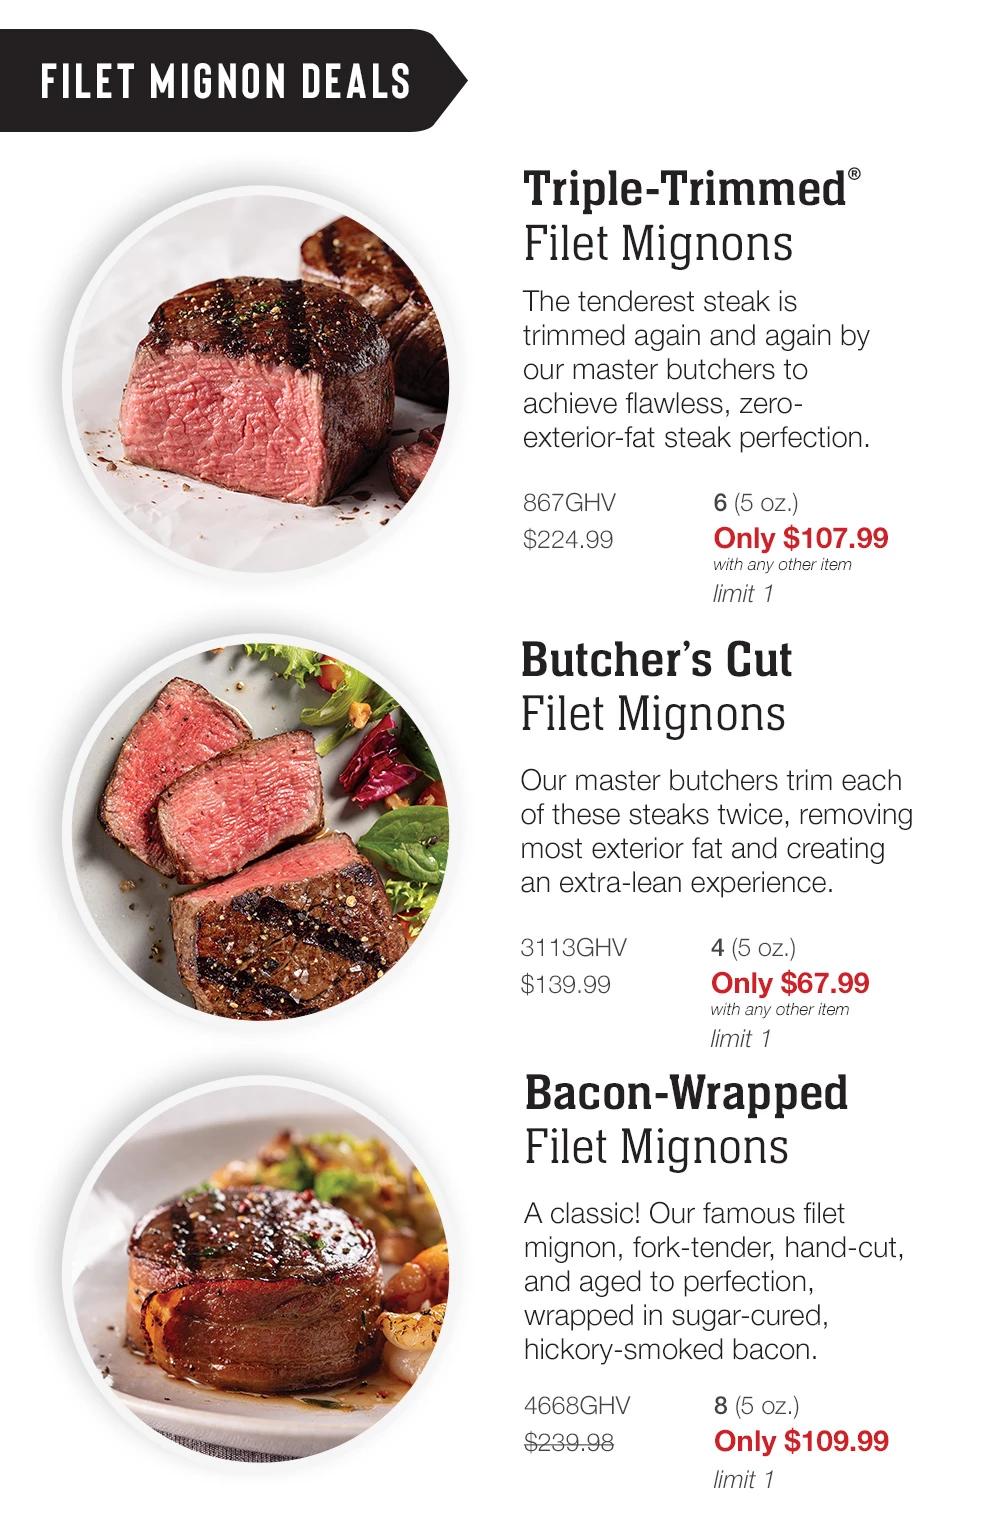 FILET MIGNON DEALS | Triple-Trimmed® Filet Mignons - The tenderest steak is trimmed again and again by our master butchers to achieve flawless, zero-exterior-fat steak perfection. - 867GHV $224.99 6 (5 oz.) Only $107.99 with any other item limit 1 | Butcher's Cut Filet Mignons - Our master butchers trim each of these steaks twice, removing most exterior fat and creating an extra-lean experience. - 3113GHV $139.99 4 (5 oz.) Only $67.99 with any other item limit 1 | Bacon-Wrapped Filet Mignons - A classic! Our famous filet mignon, fork-tender, hand-cut, and aged to perfection, wrapped in sugar-cured, hickory-smoked bacon. - 4668GHV $239.98 8 (5 oz.) Only $109.99 limit 1